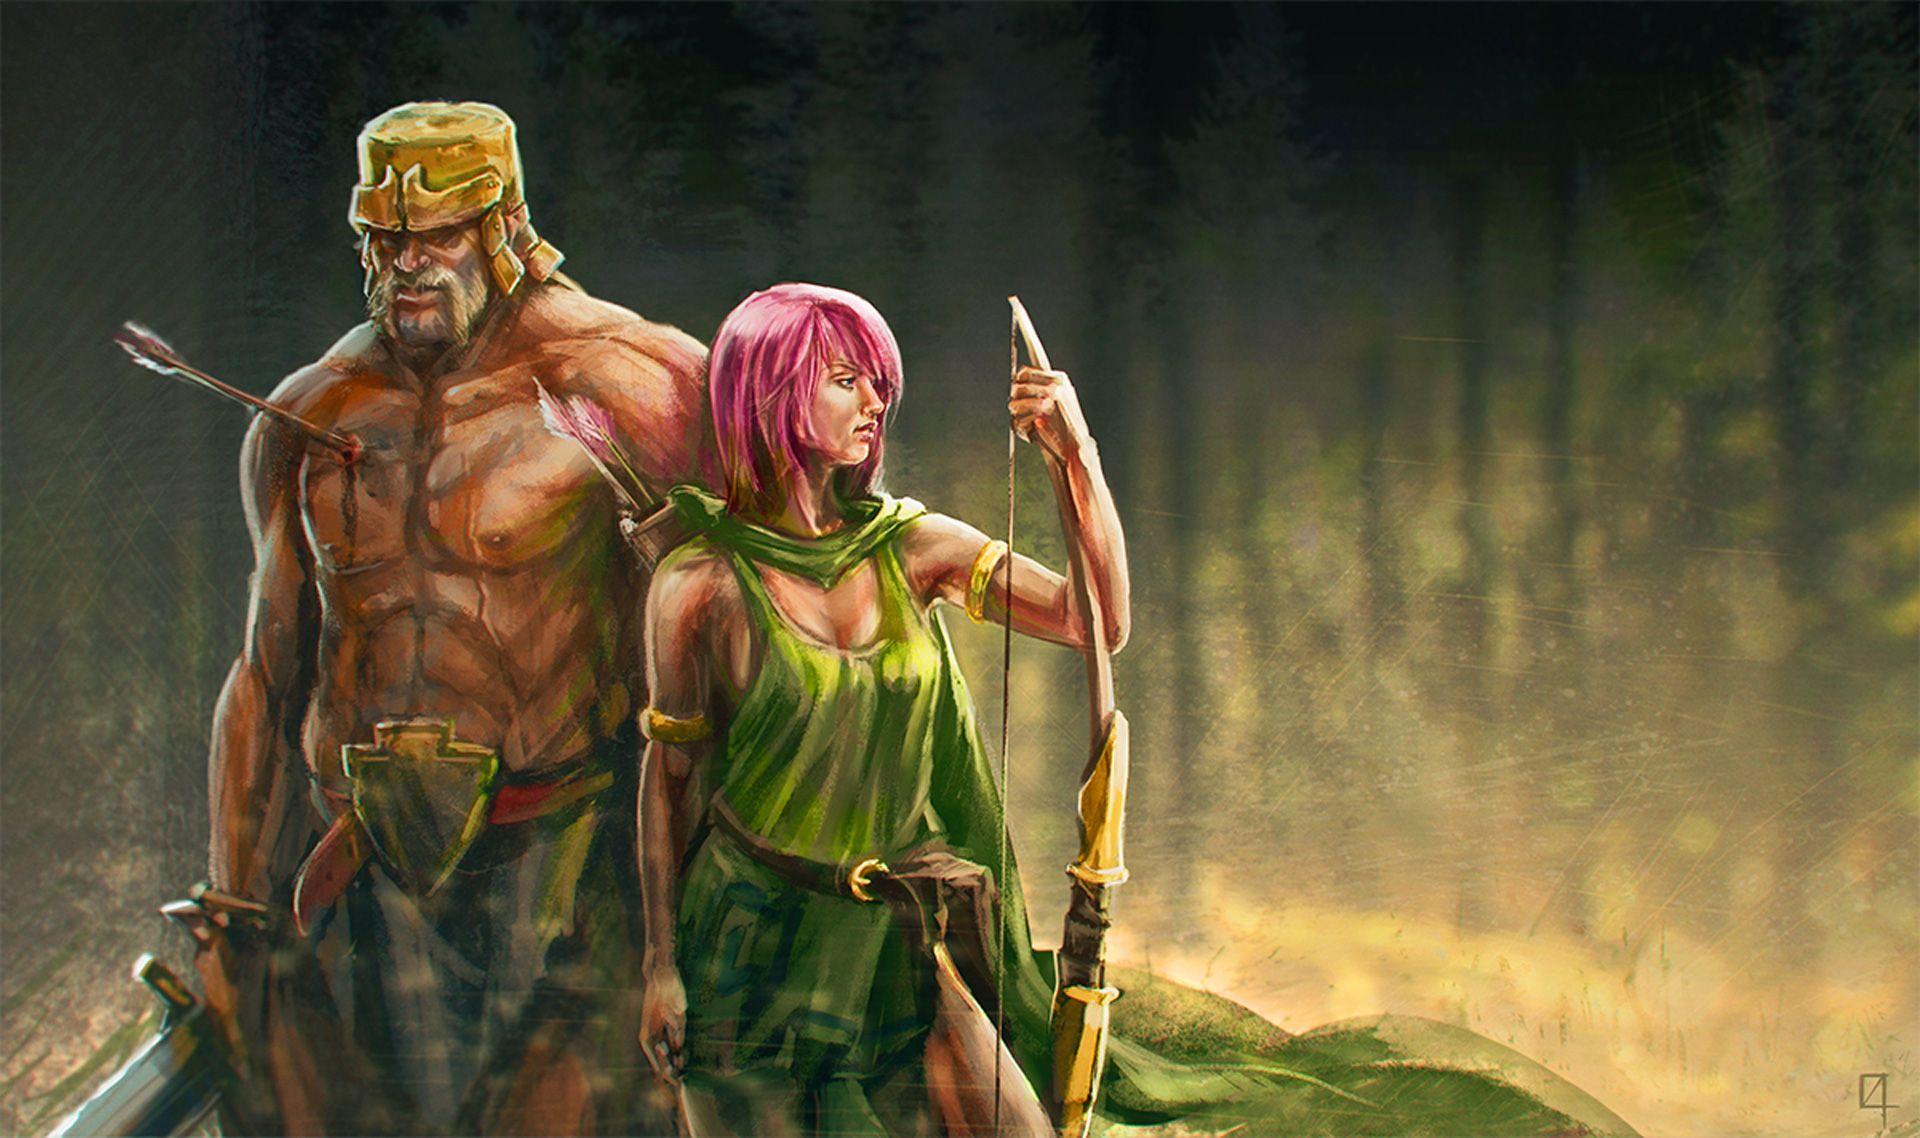 Clash Of Clans Artwork Archer And Barbarian, HD Games, 4k